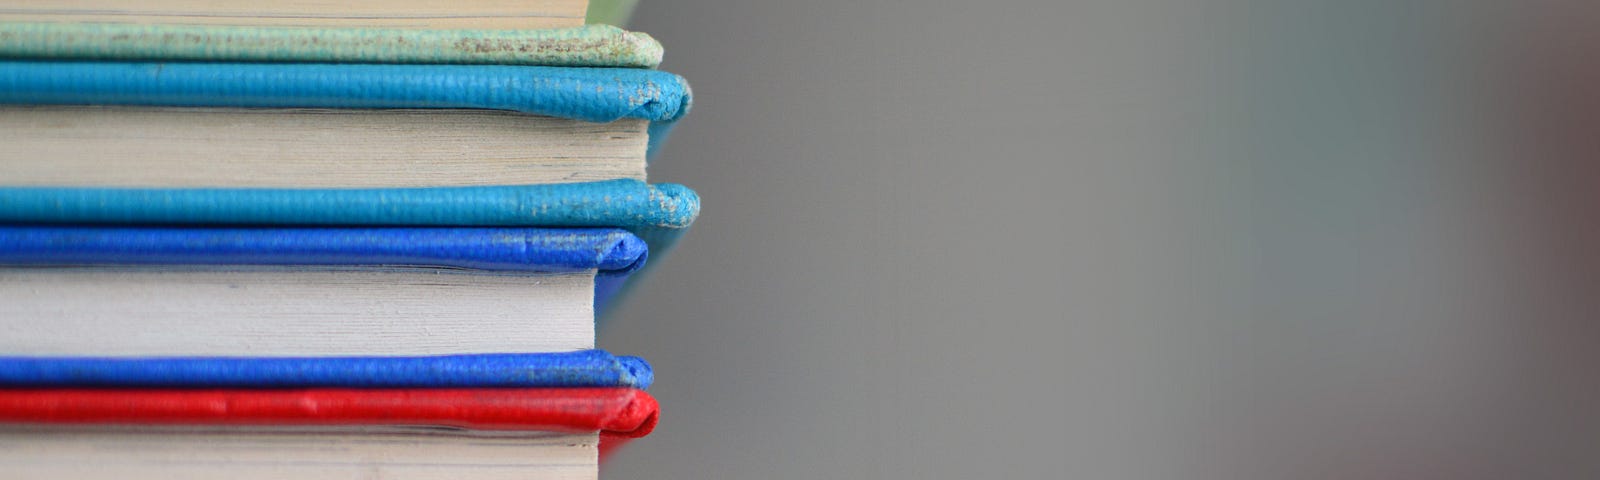 A stack of books with a variety of colored covers.